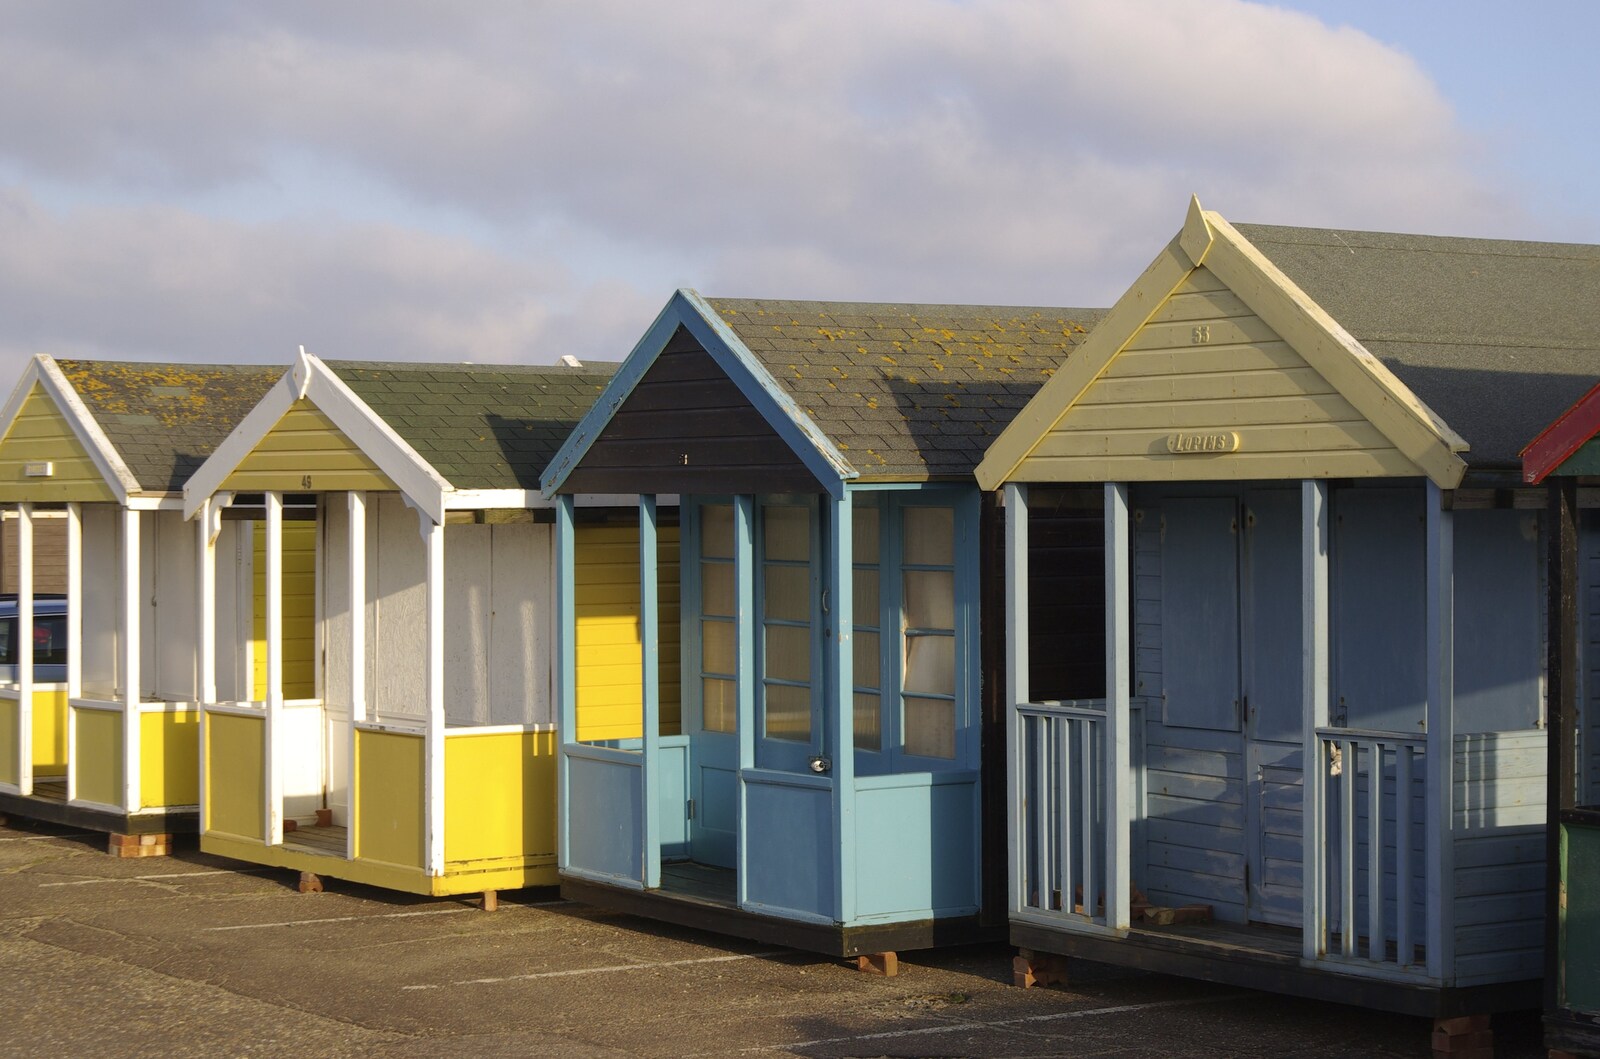 Beach huts in the car park from To The Coast By Satnav, Southwold, Suffolk - 28th December 2008